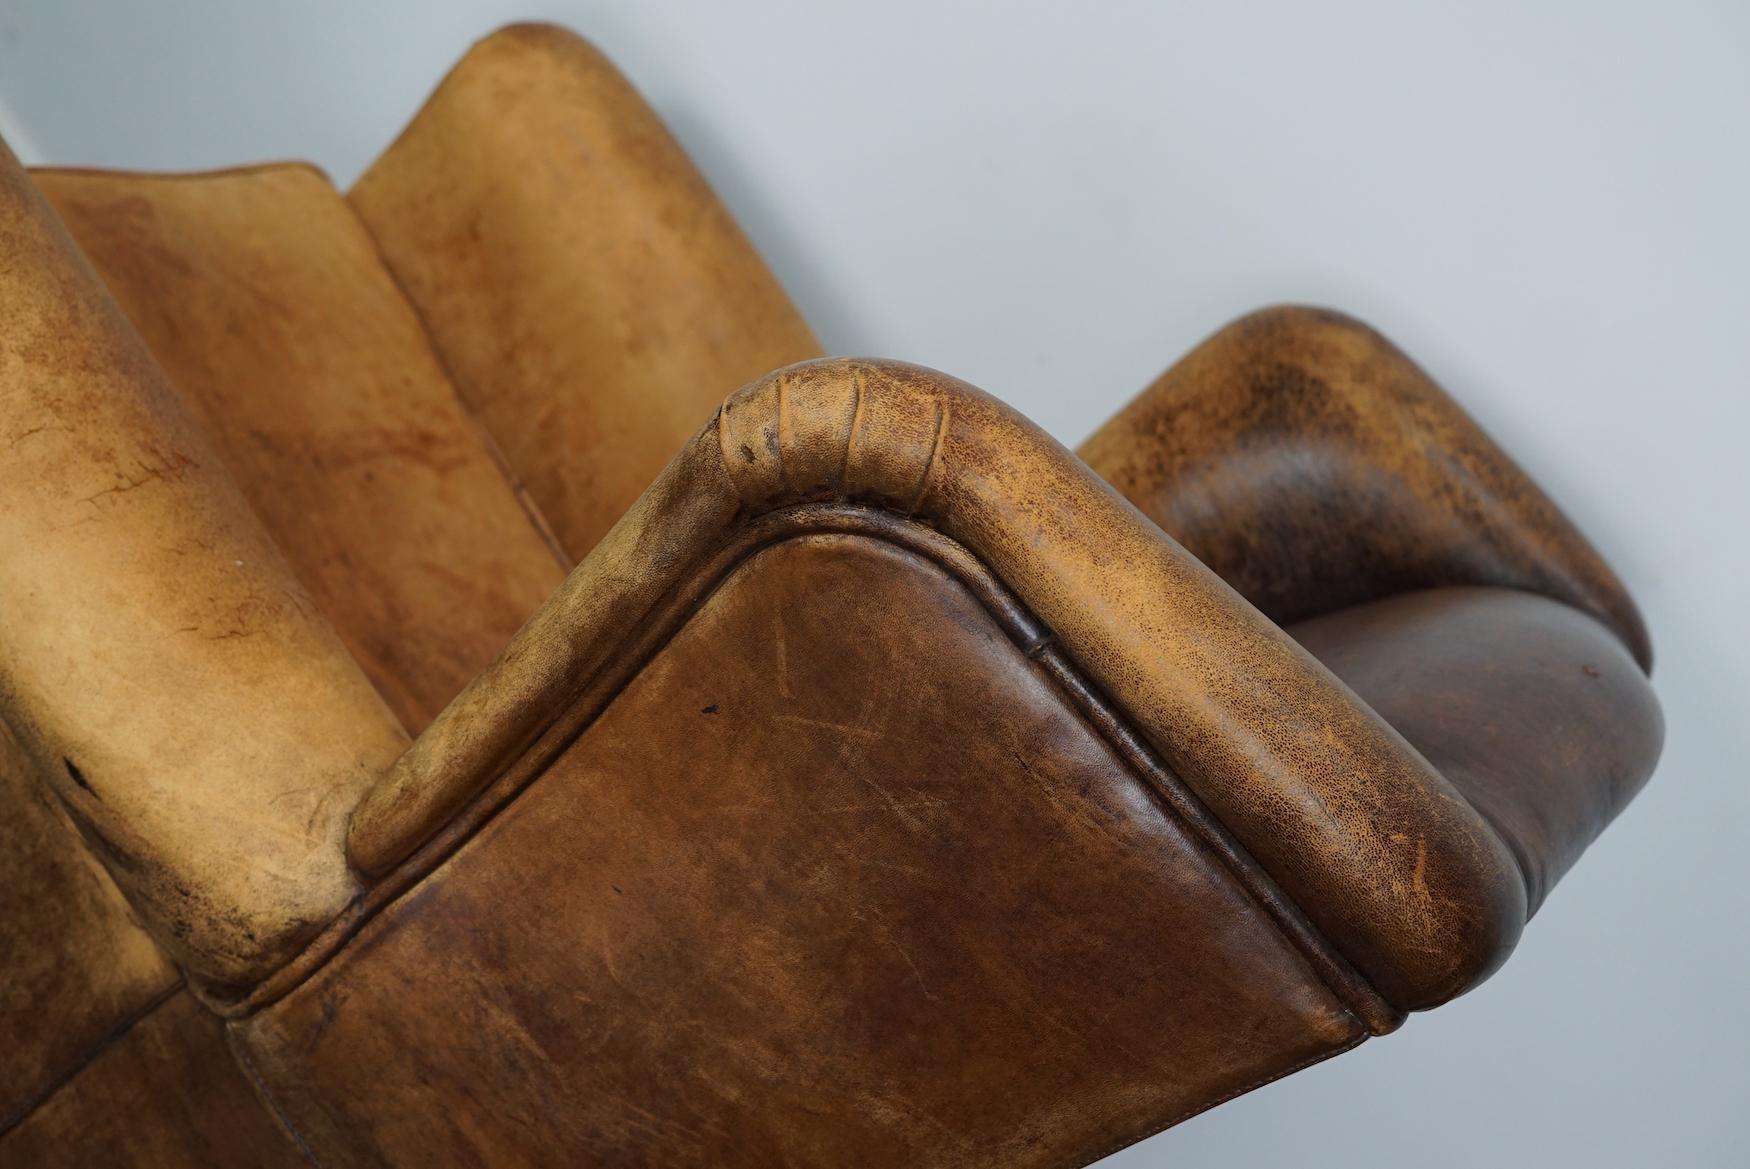 This cognac-colored leather club chair comes from the Netherlands. It is upholstered with cognac-colored leather and features metal rivets and wooden legs.